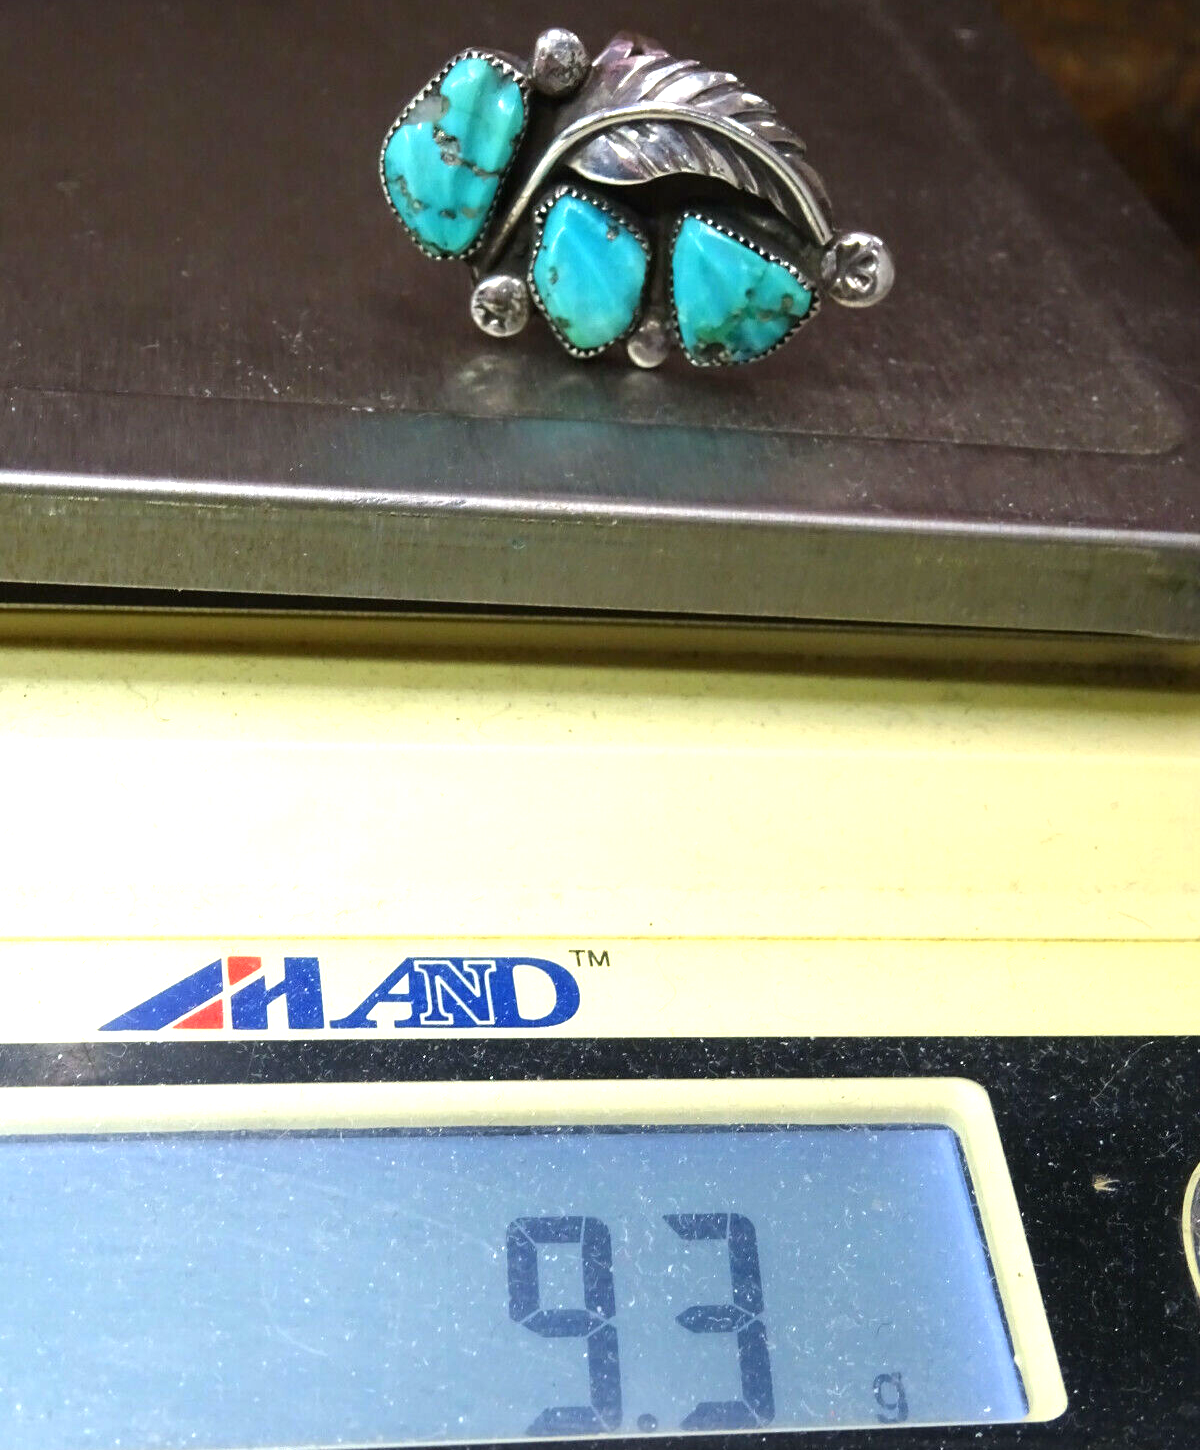 Old Pawn SIGNED ZUNI Sterling Silver & Turquoise Ring, FE Signed, Sz. 6.5